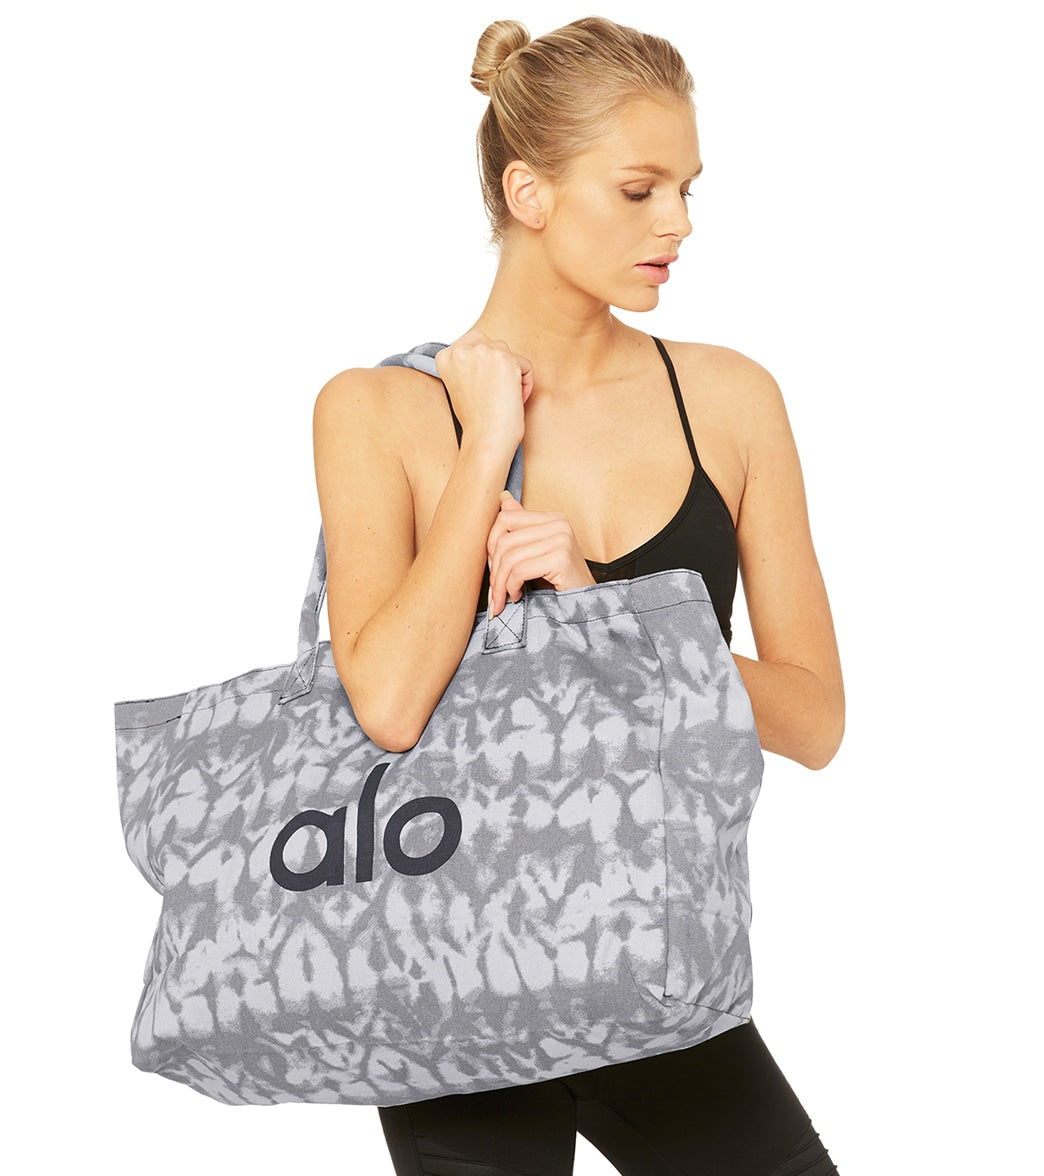 Alo Special Edition Yoga Tote Bag NEW for Sale in Huntington Beach